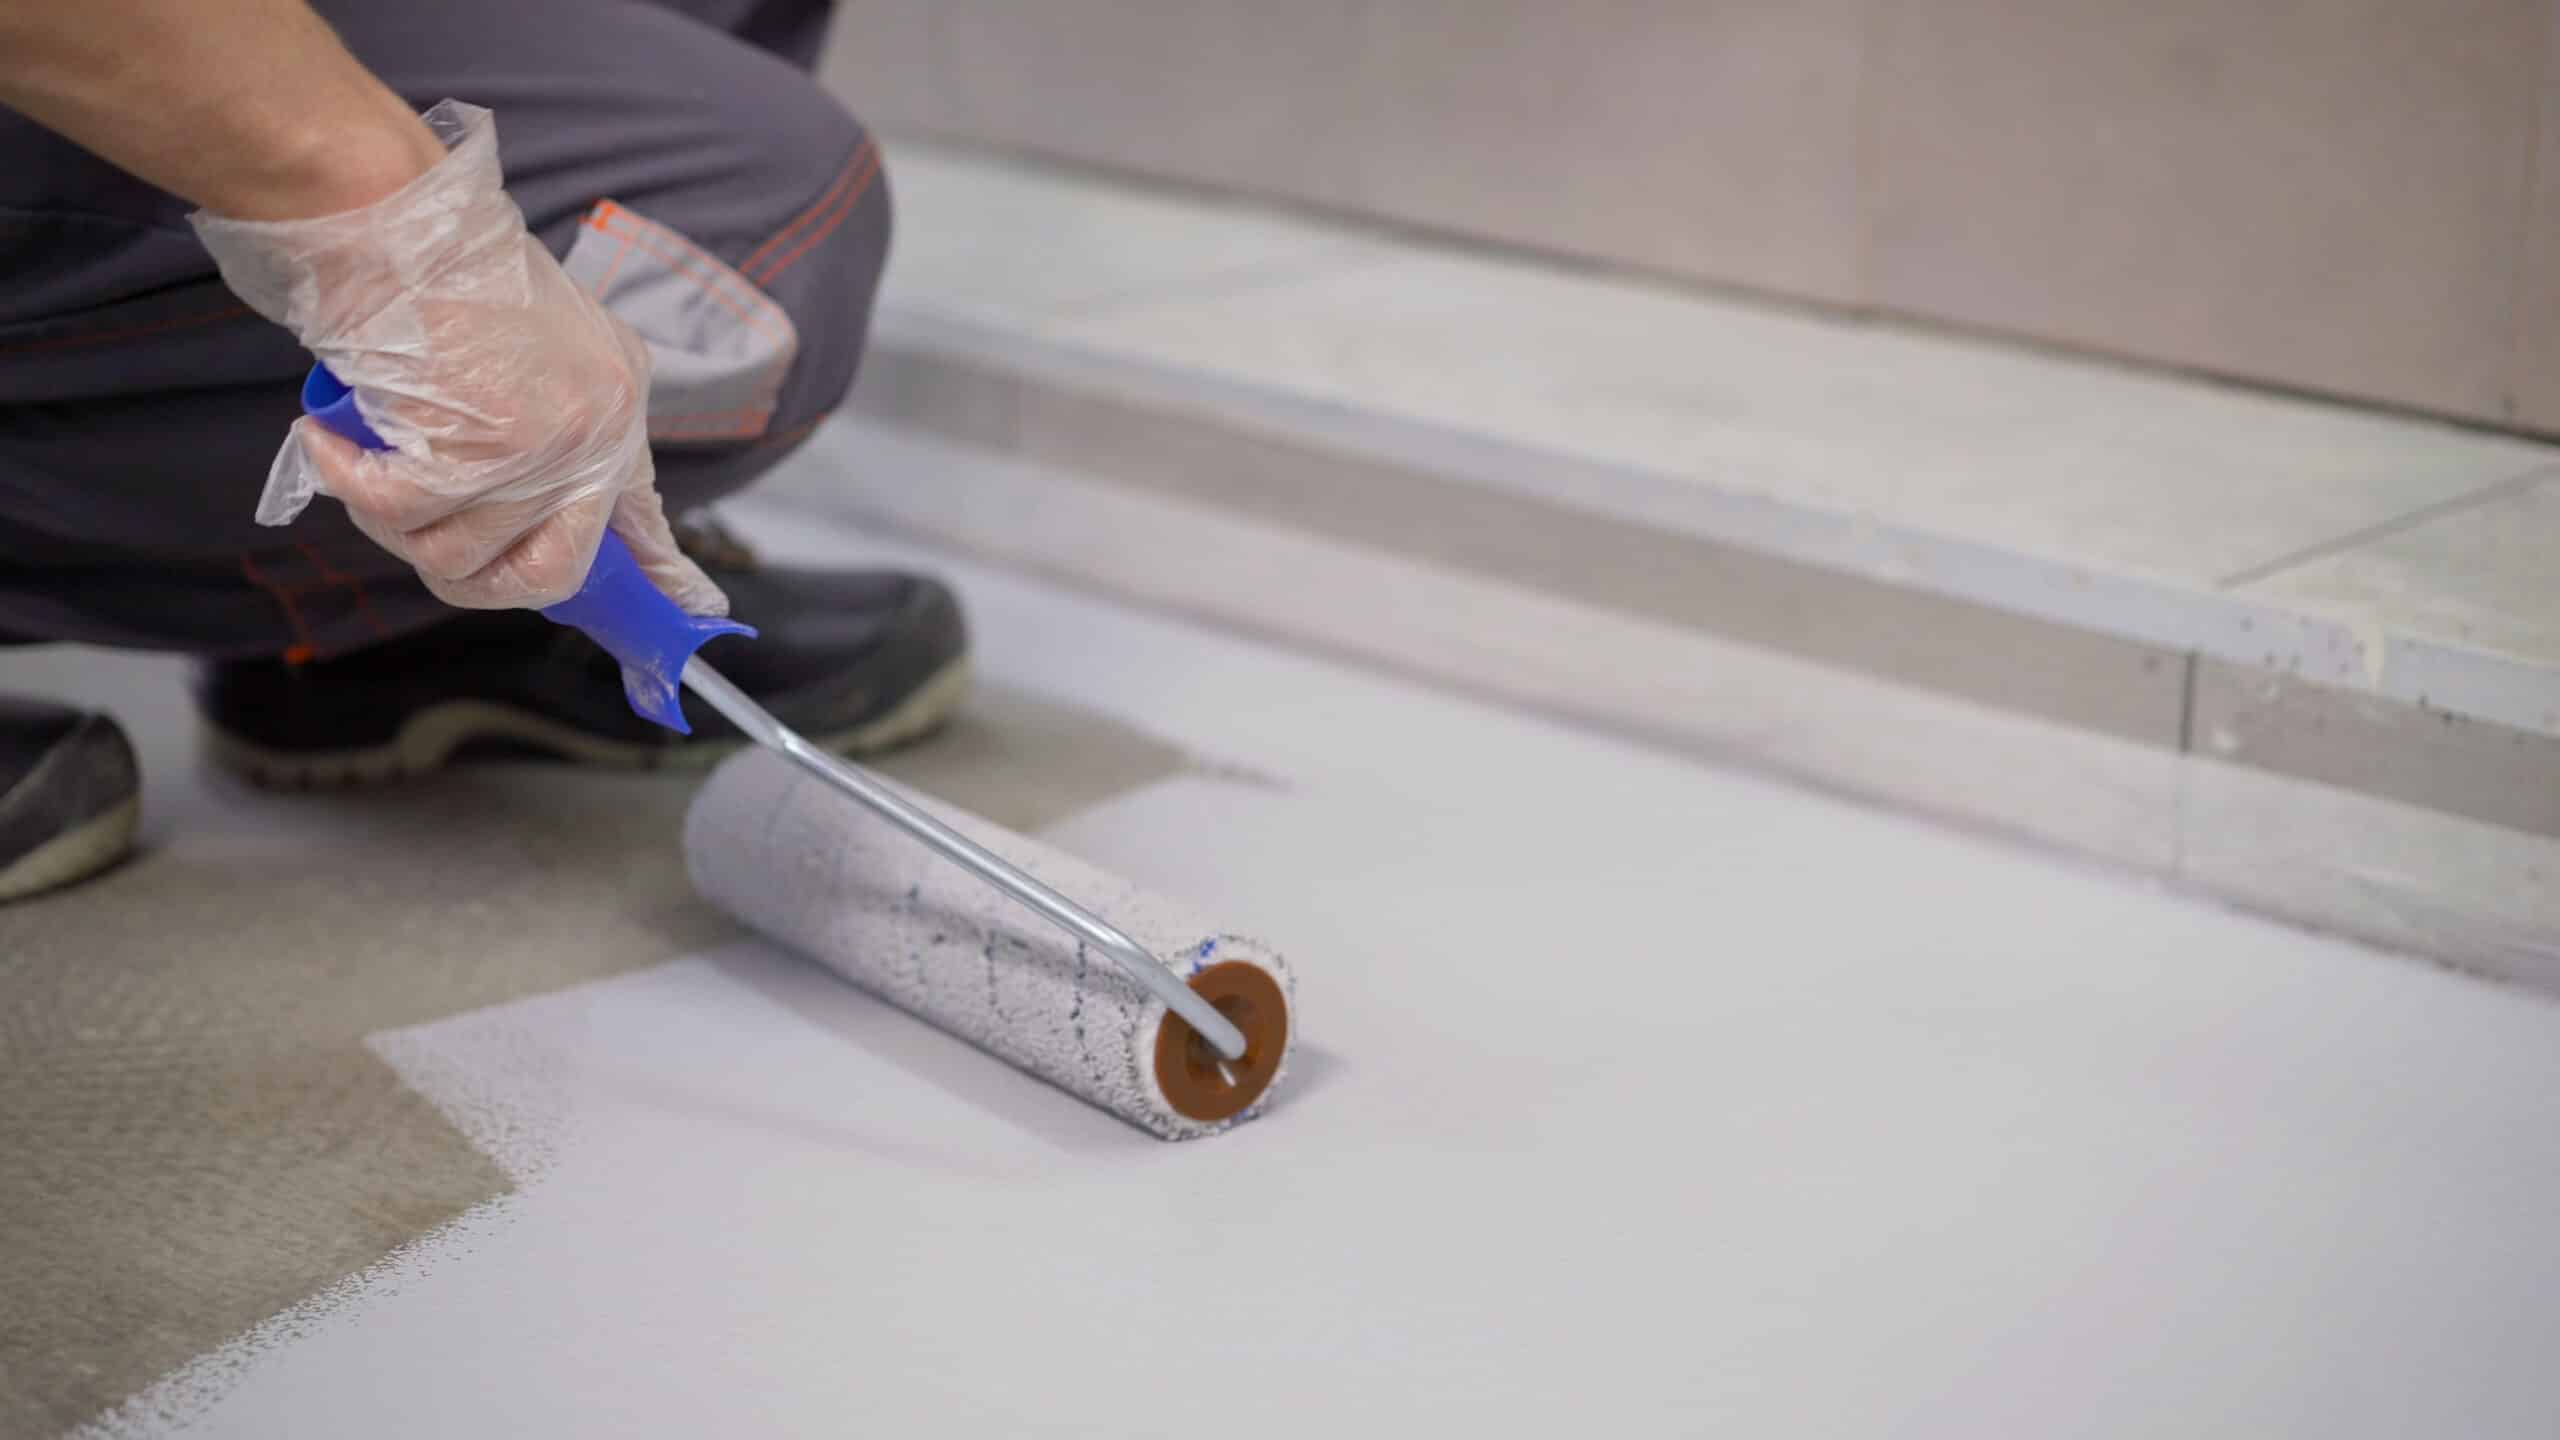 A worker applying Concrete Non-Slip Paint with a roller for the purpose of slip prevention